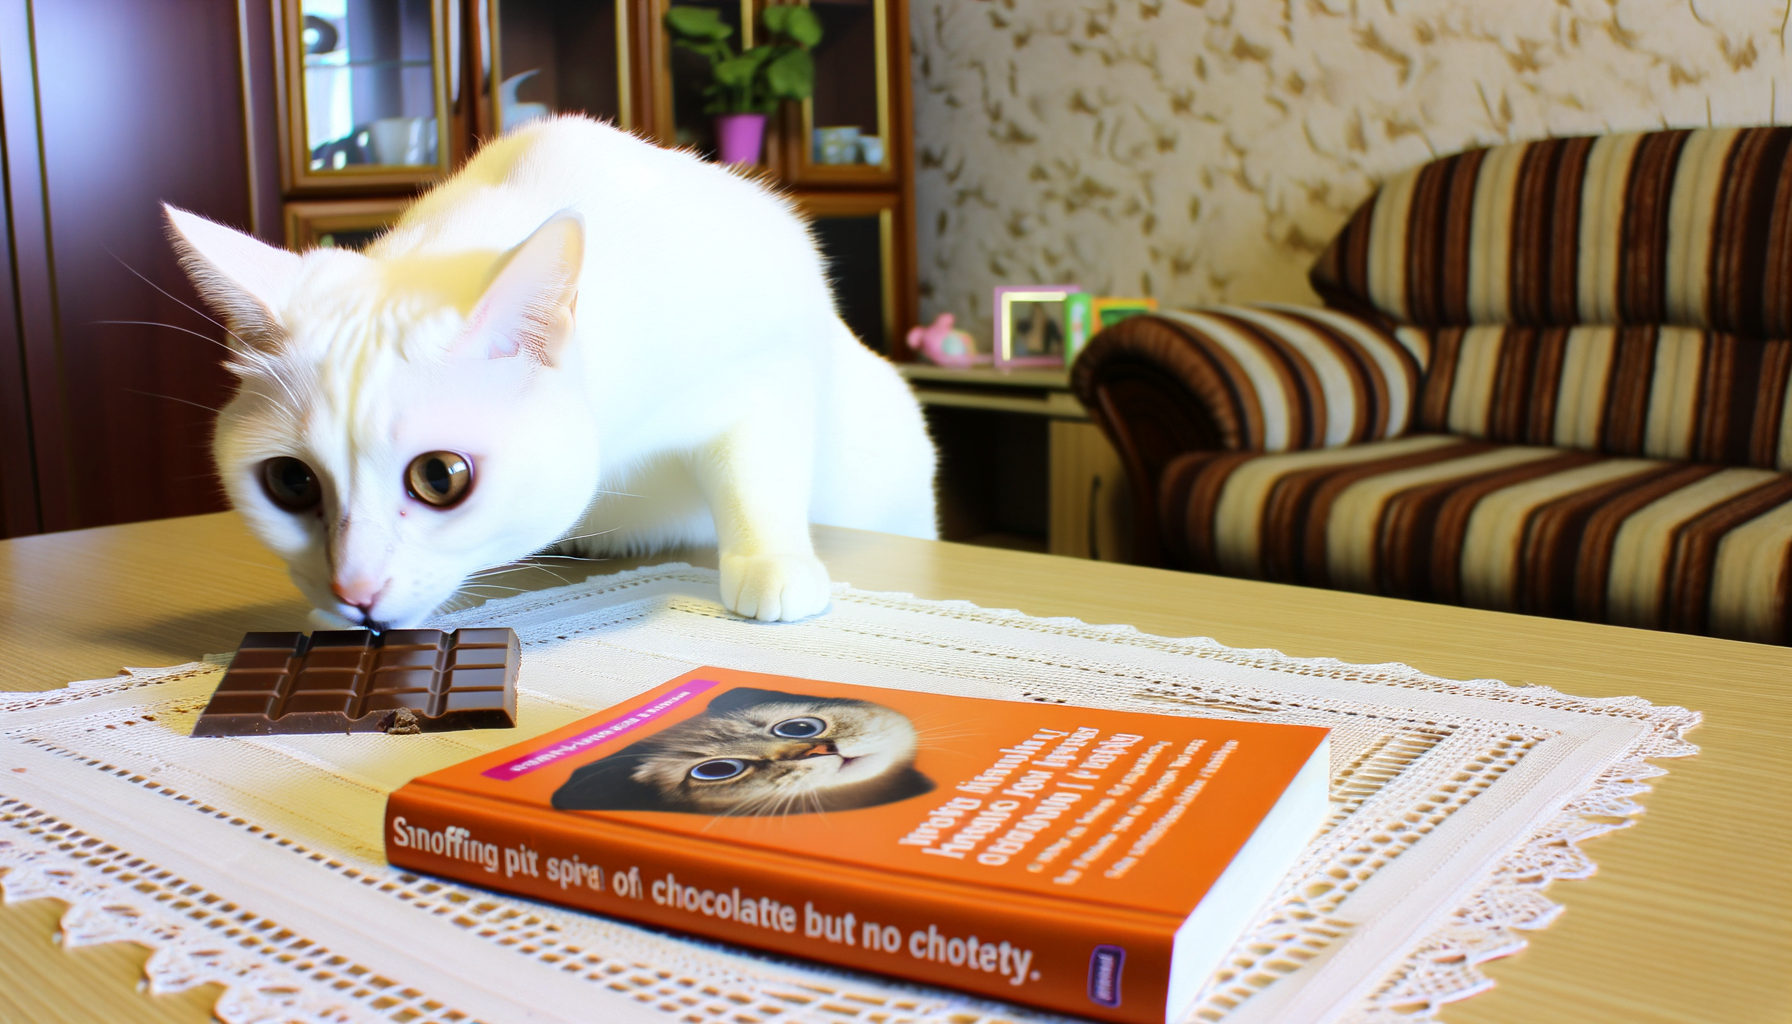 "Decoding the Mystery: Can Cats Safely Indulge in Chocolate?"